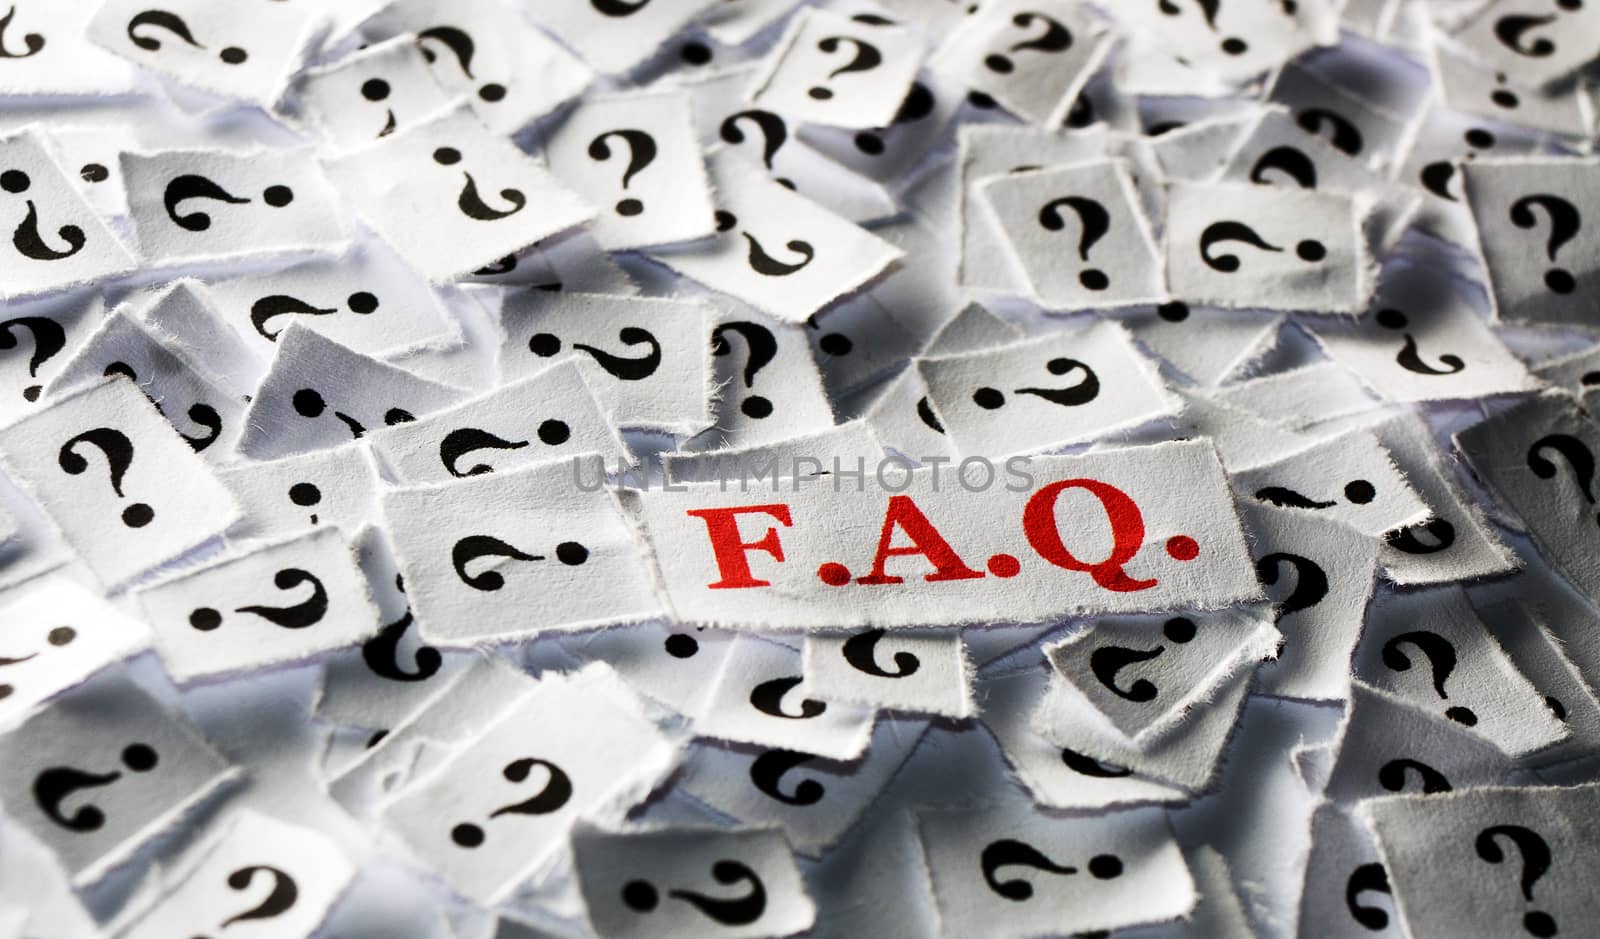  FAQ of question marks on white papers -hard light